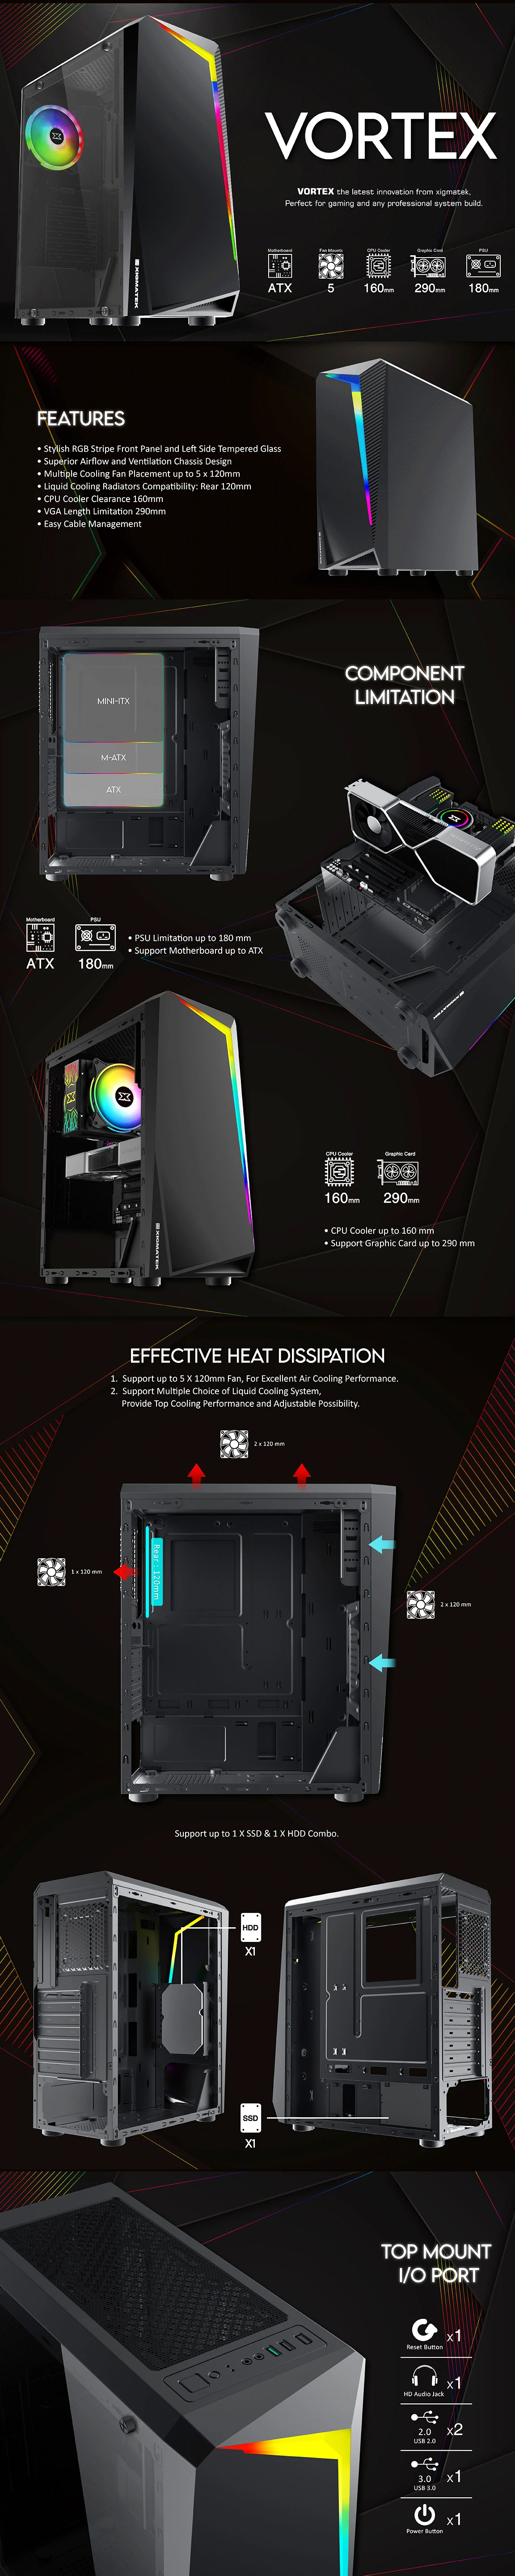 Overview - Xigmatek - Vortex - Tempered Glass ARGB Mid Tower Chassis